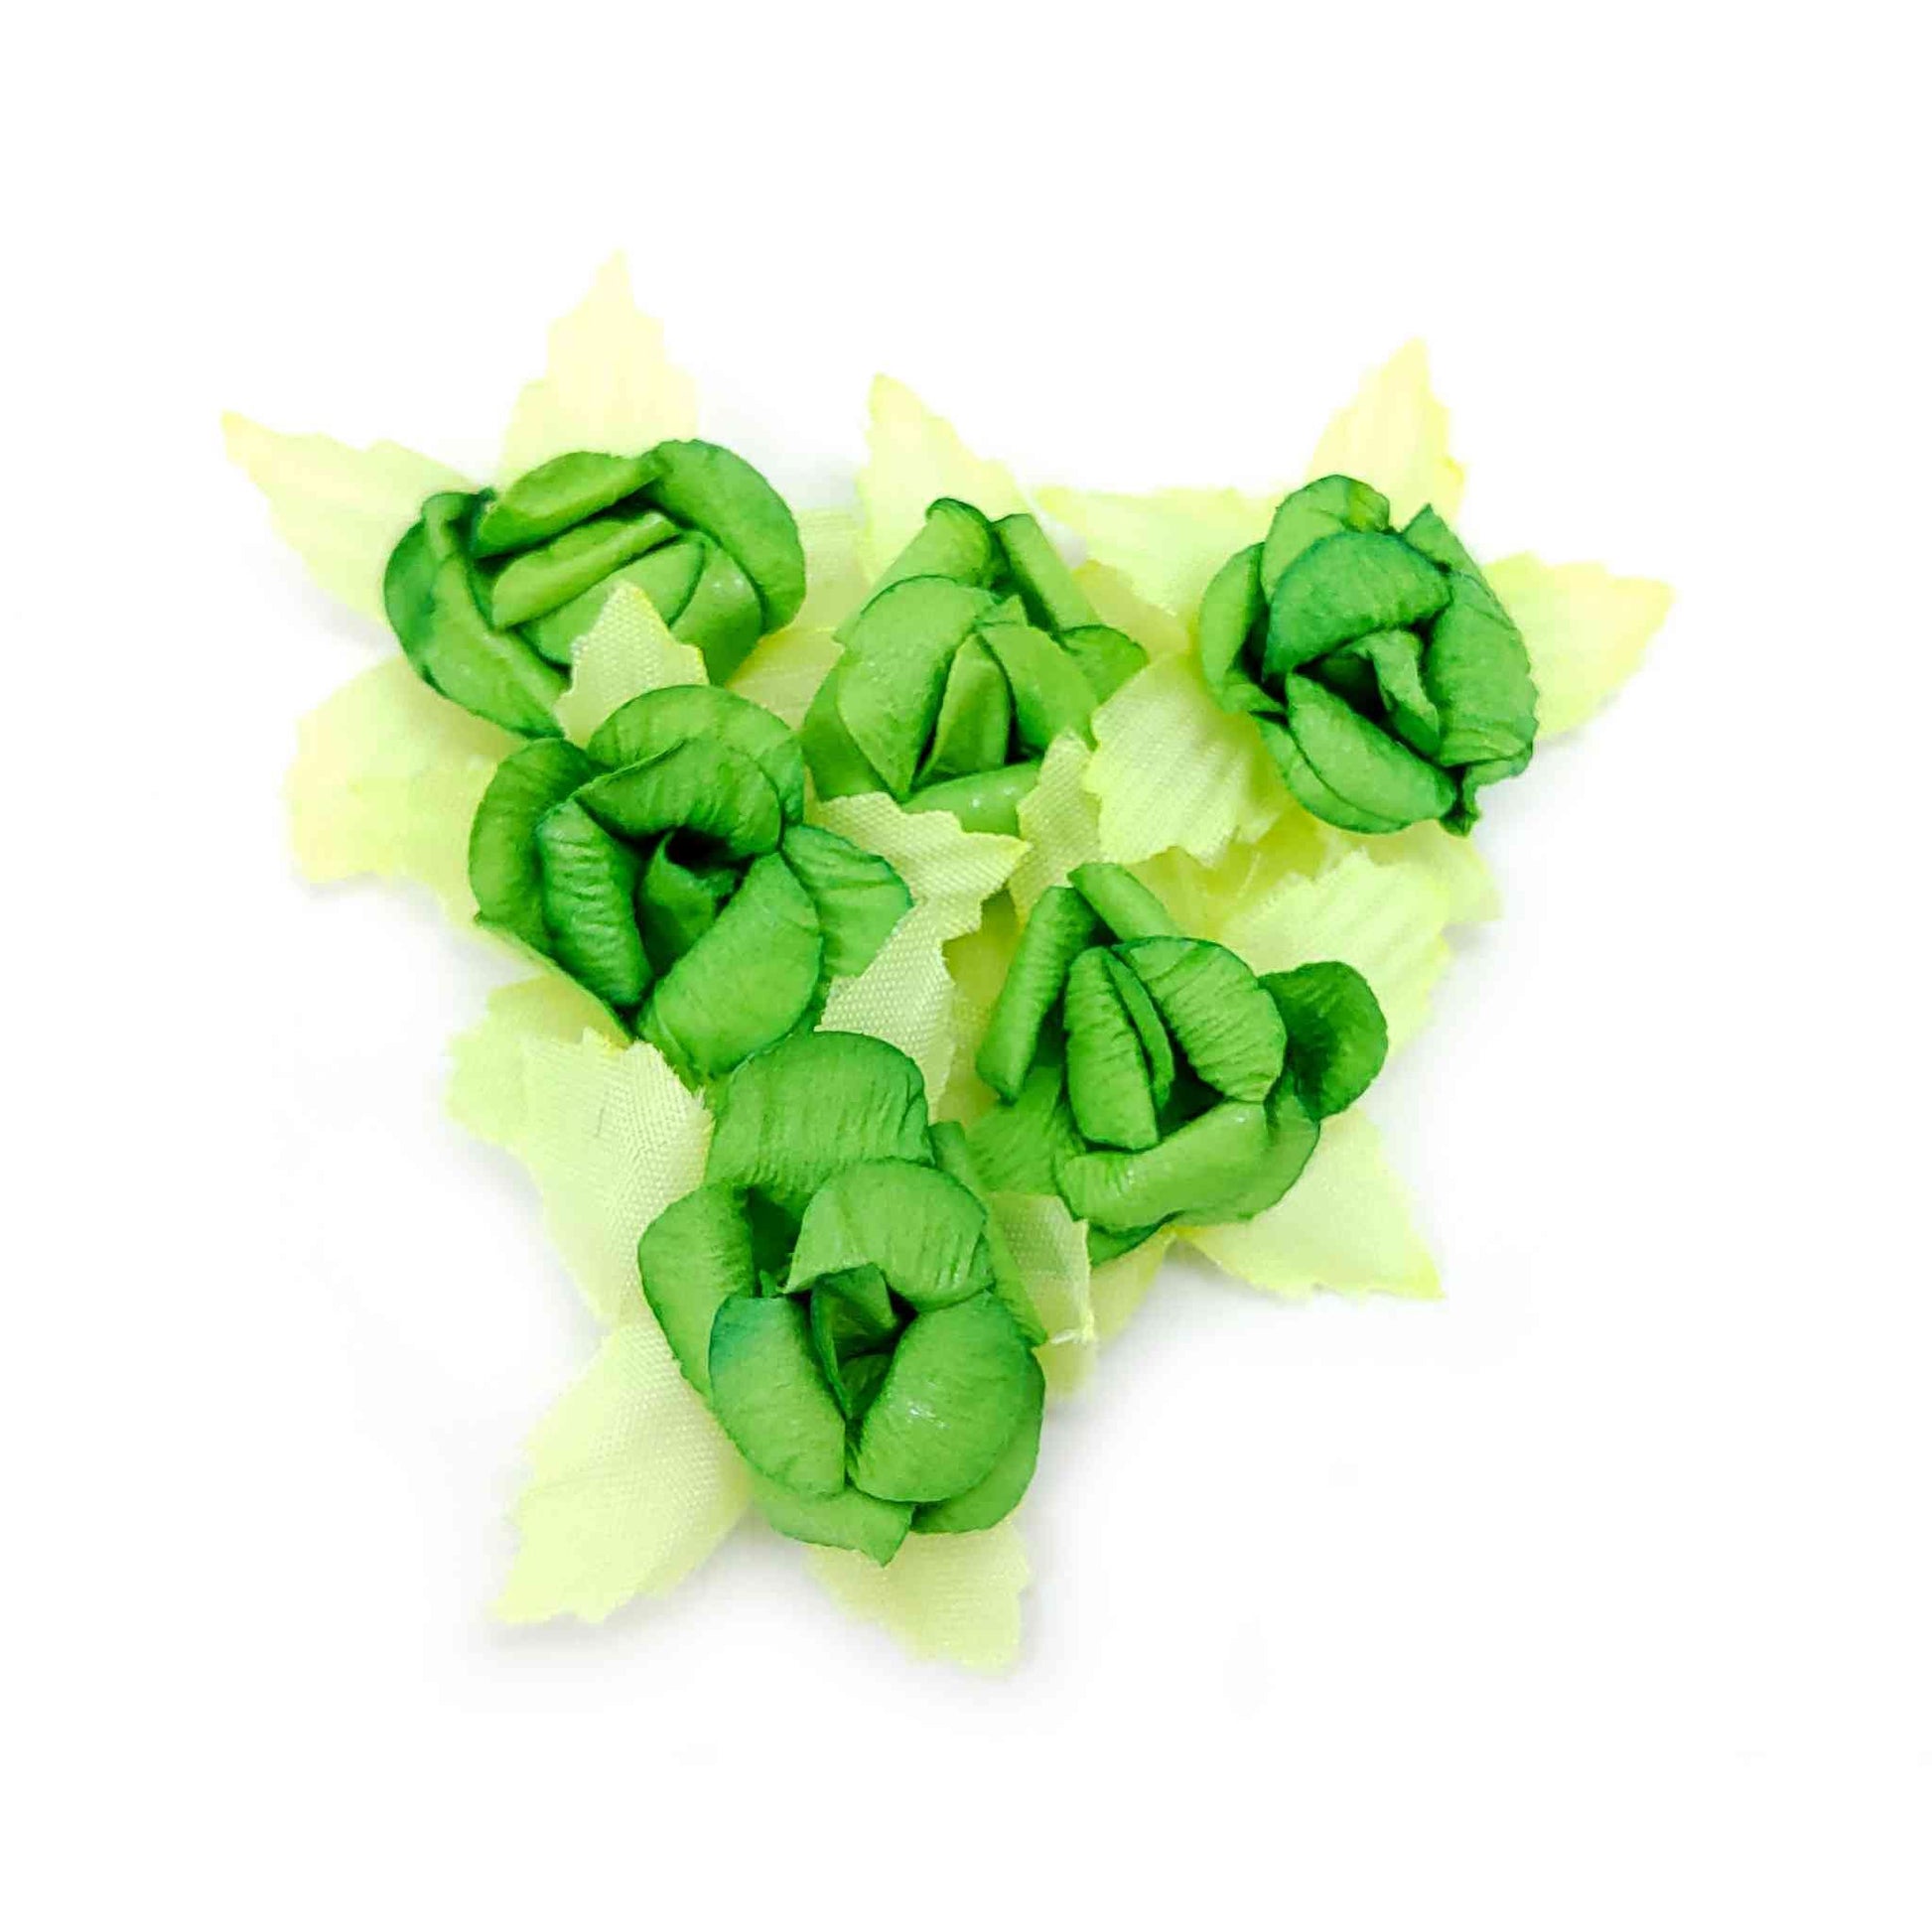 Indian Petals Beautiful Small Paper Flowers with Leaf for DIY Craft, Trouseau Packing or Decoration (Bunch of 12) - Design 30, Green - Indian Petals